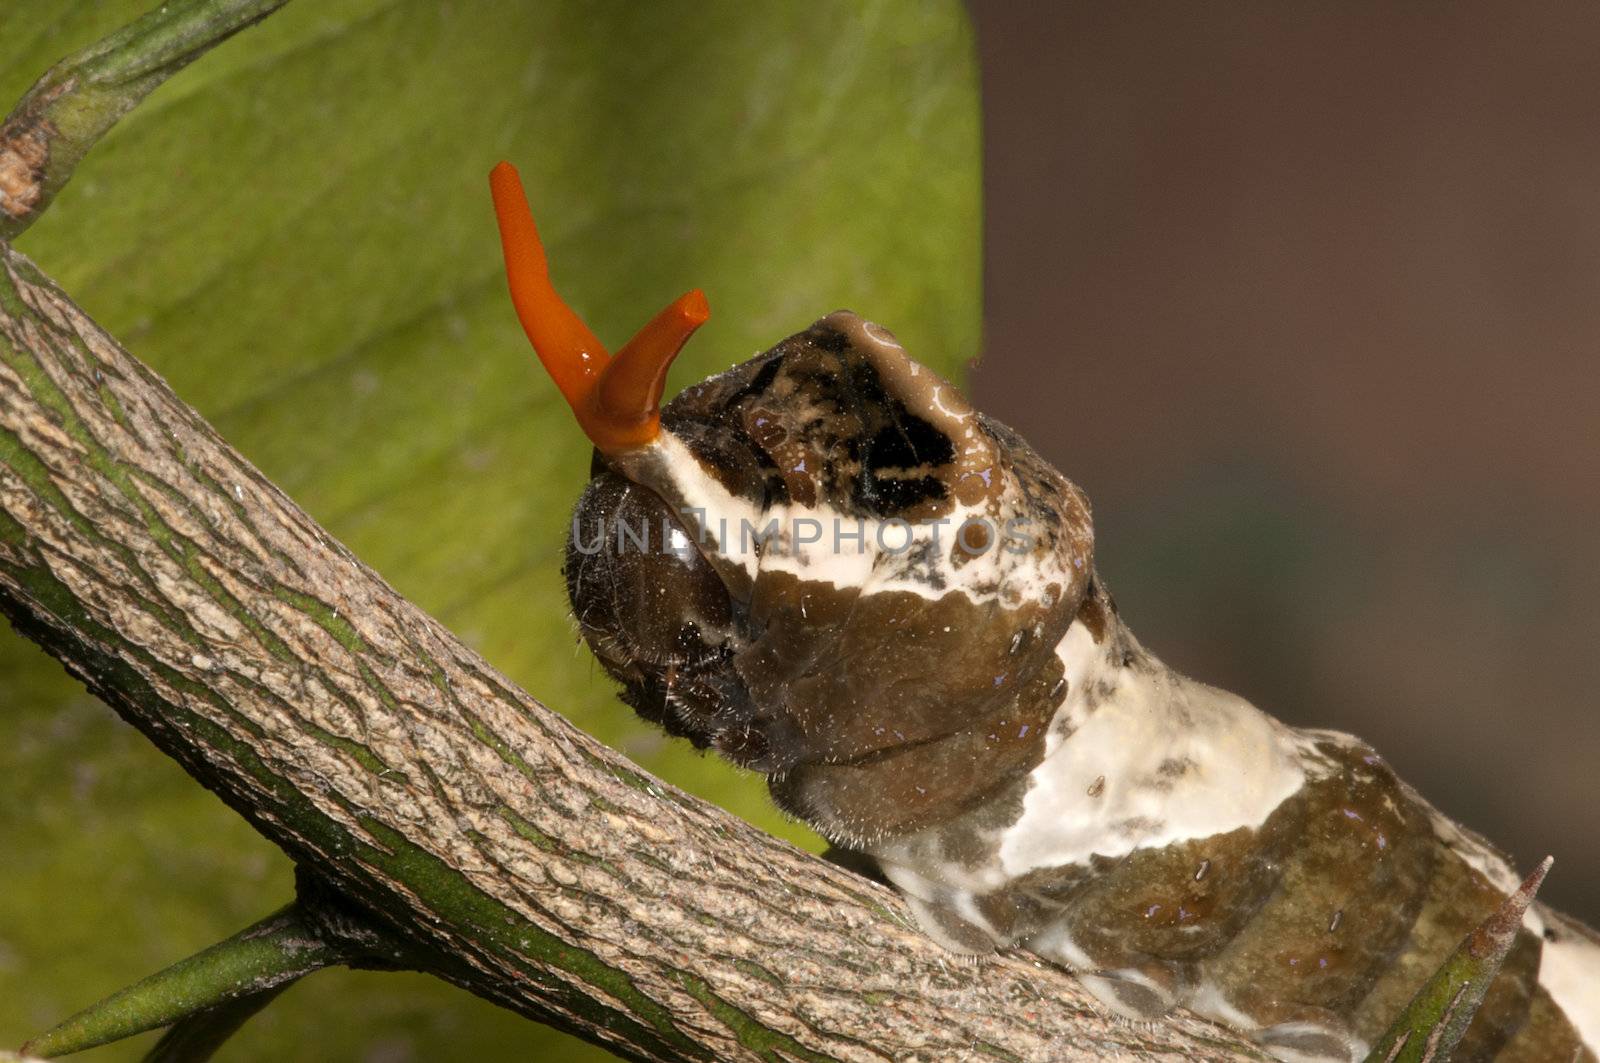 The mature caterpillar resembles bird droppings to deter predators, and if that doesn't work they use their red osmeterium.These are 'horns' which they can display and then retract. The coloration is dingy brown and or olive with white patches and small patches of purple. Citrus fruit farmers often call the caterpillars orange dogs or orange puppies because of the devastation they can cause on their crops.